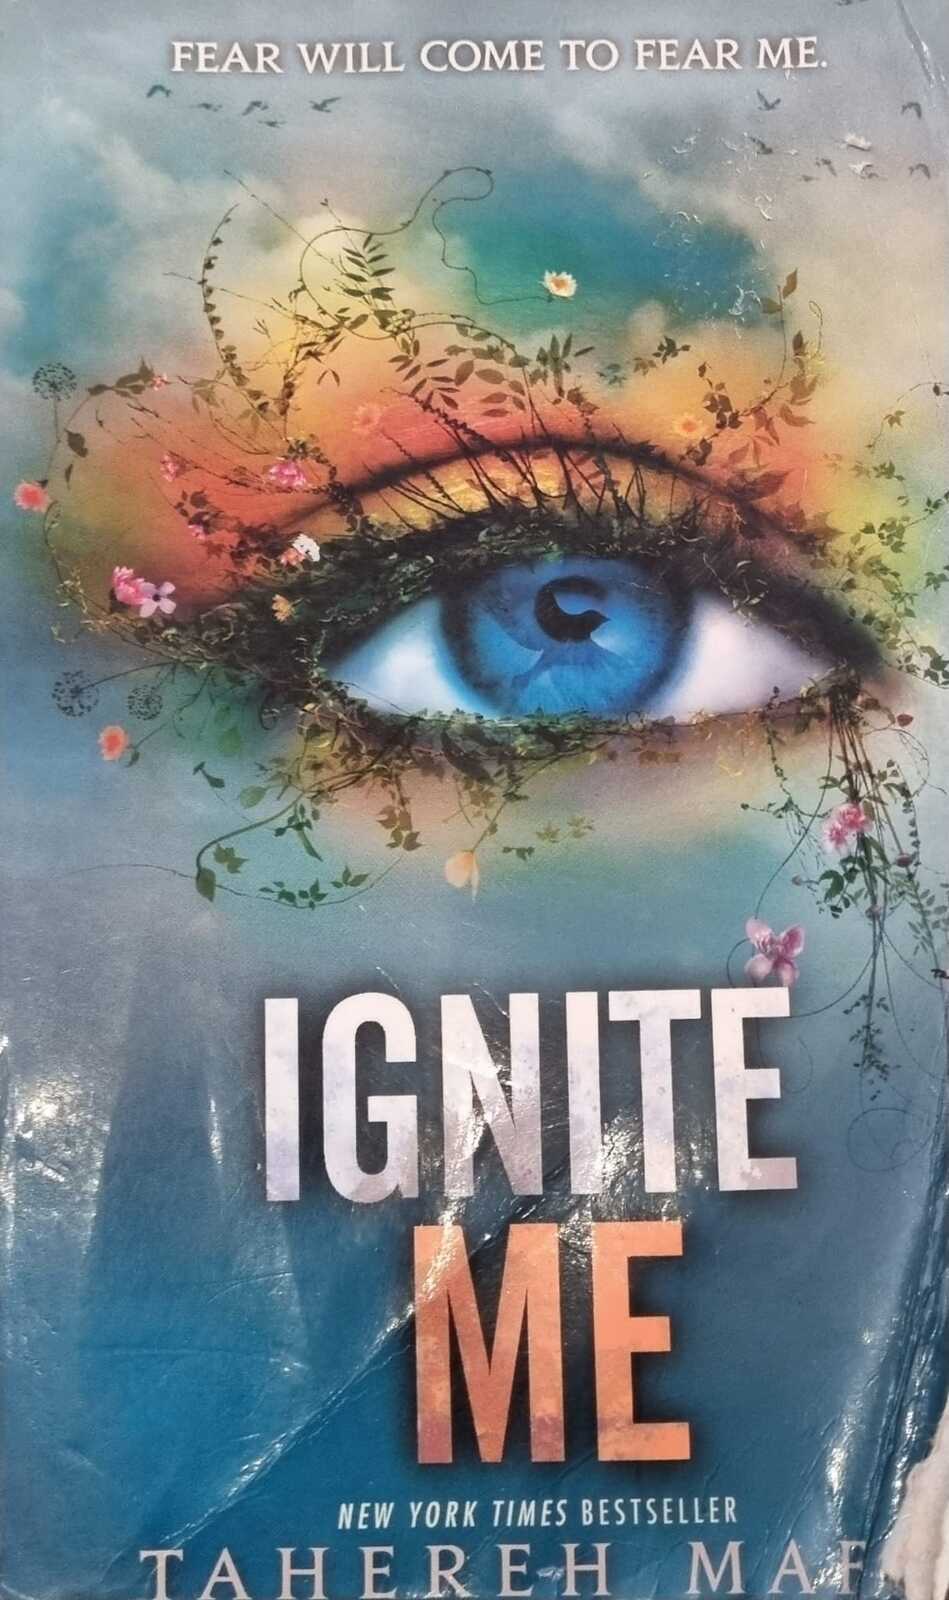 Ignite Me: Shatter Me series 3 by Tahereh Mafi, Paperback, 9781761066757